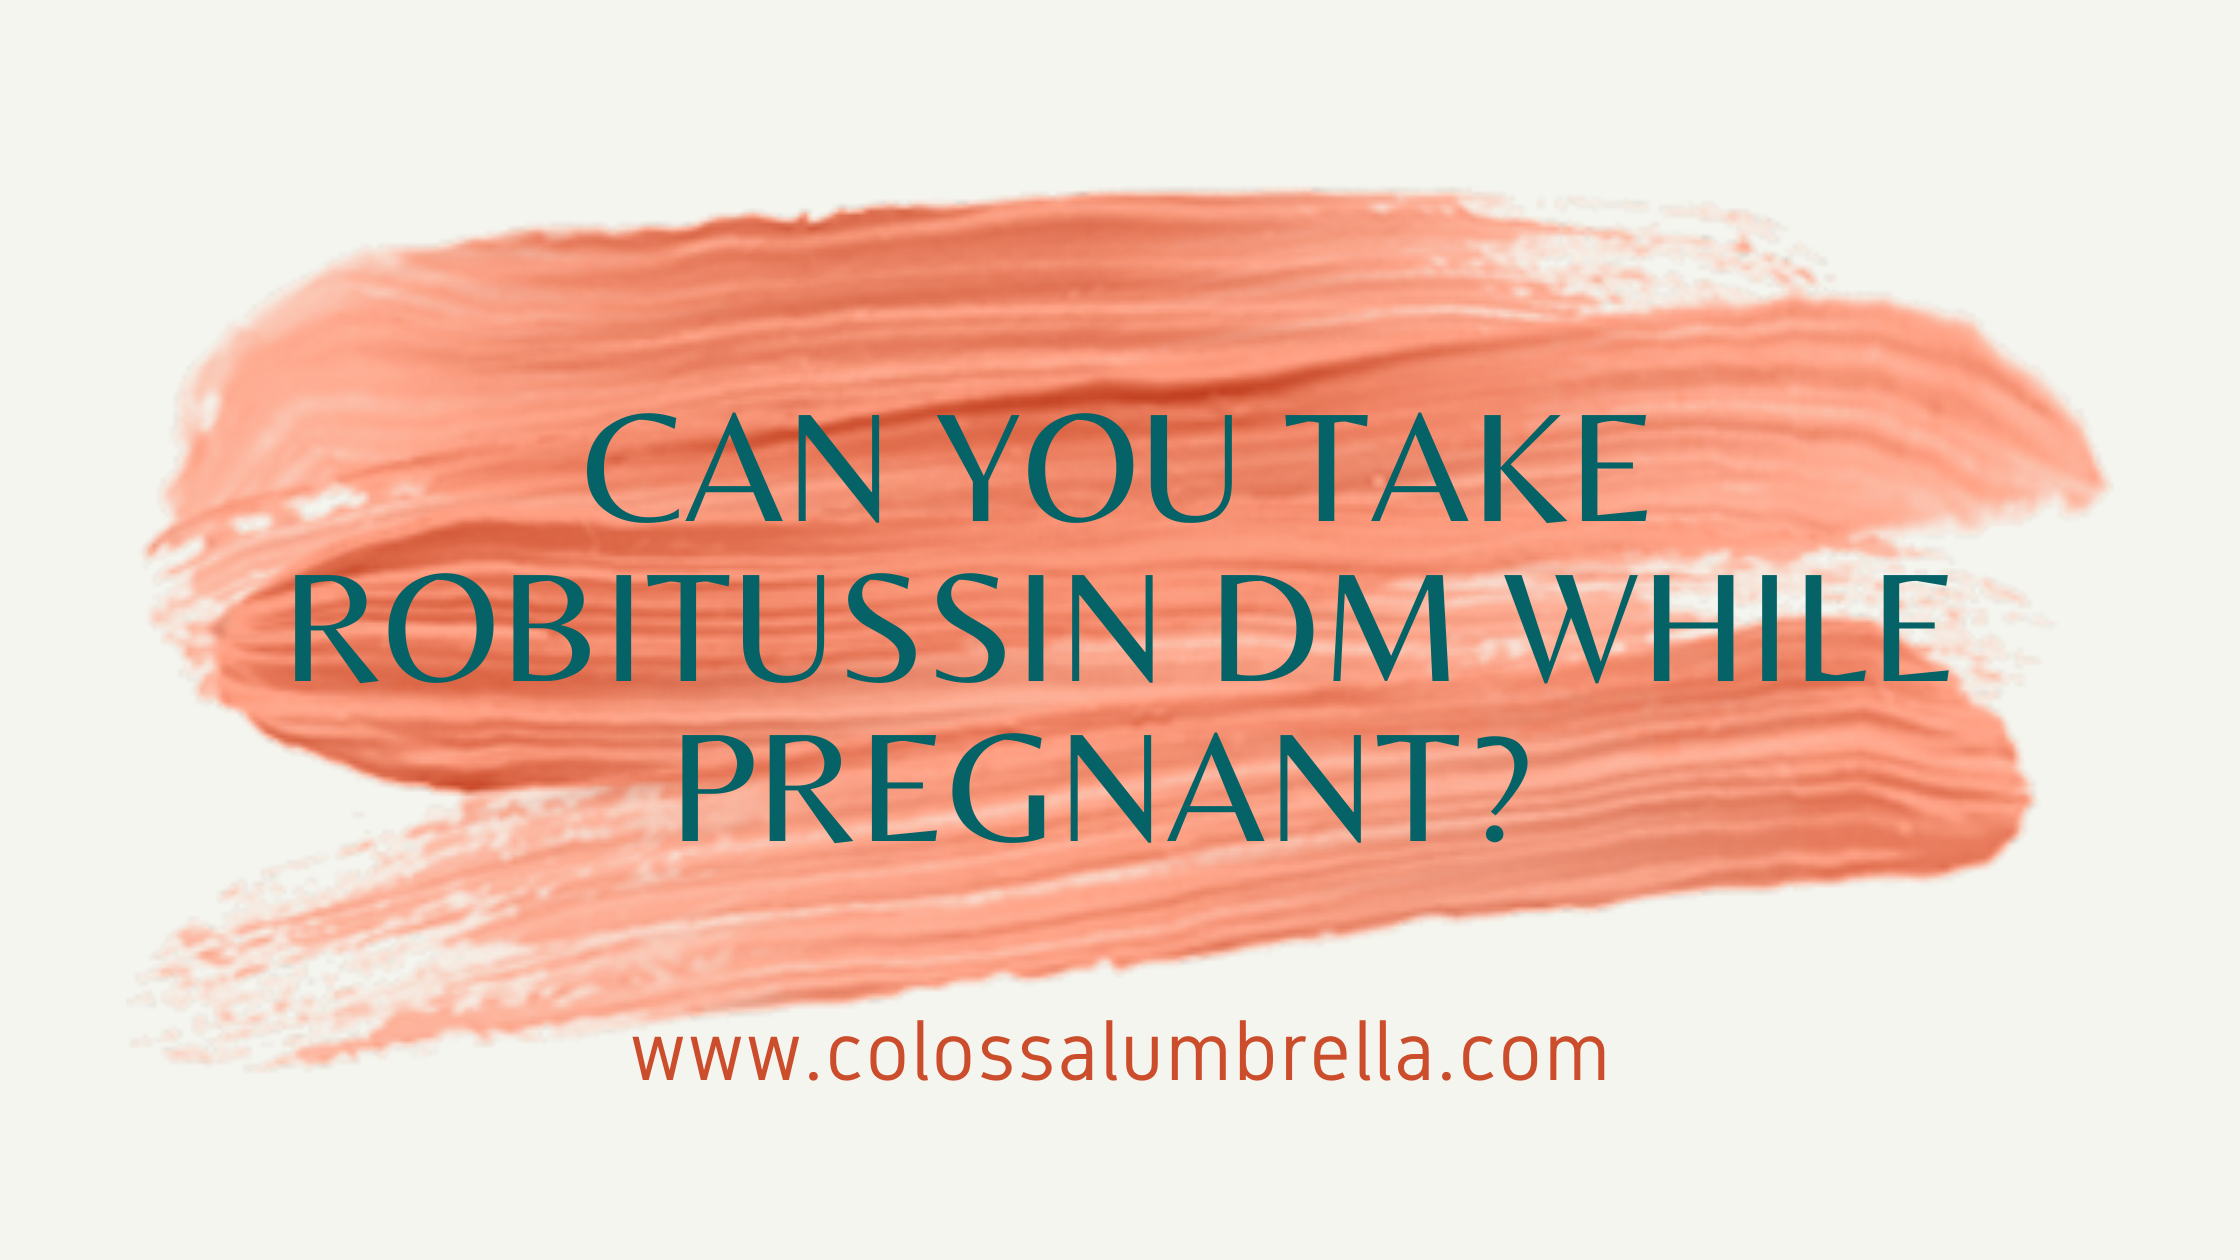 Can you take Robitussin DM while pregnant? What is the risk?